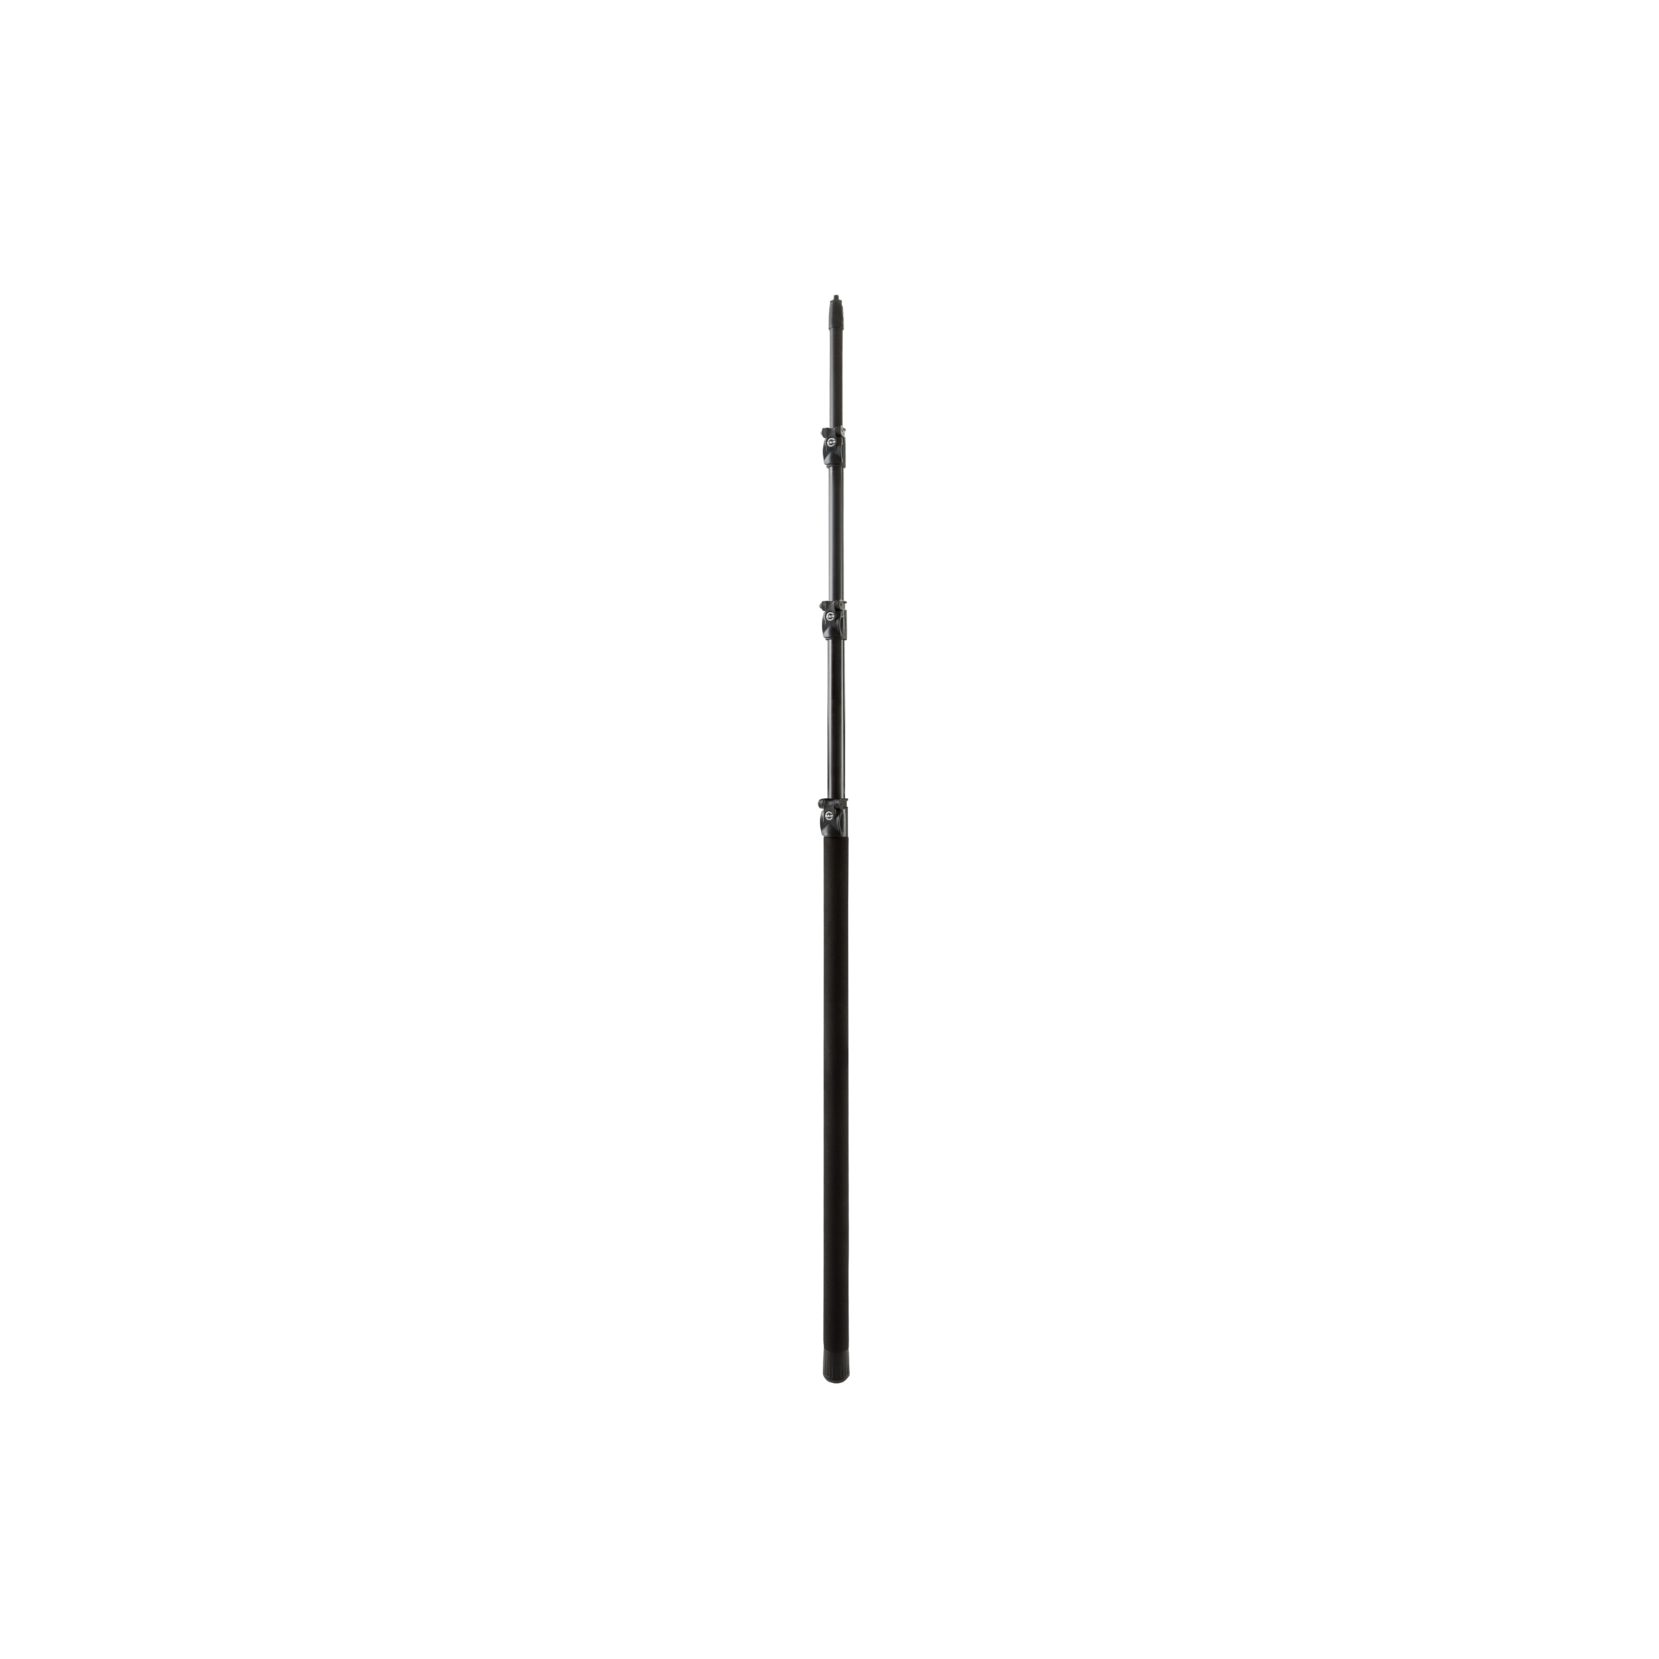 MICROPHONE STAND K&M BLACK (FISHING POLE TYPE 1 - 3.22 M) - apex catalogue